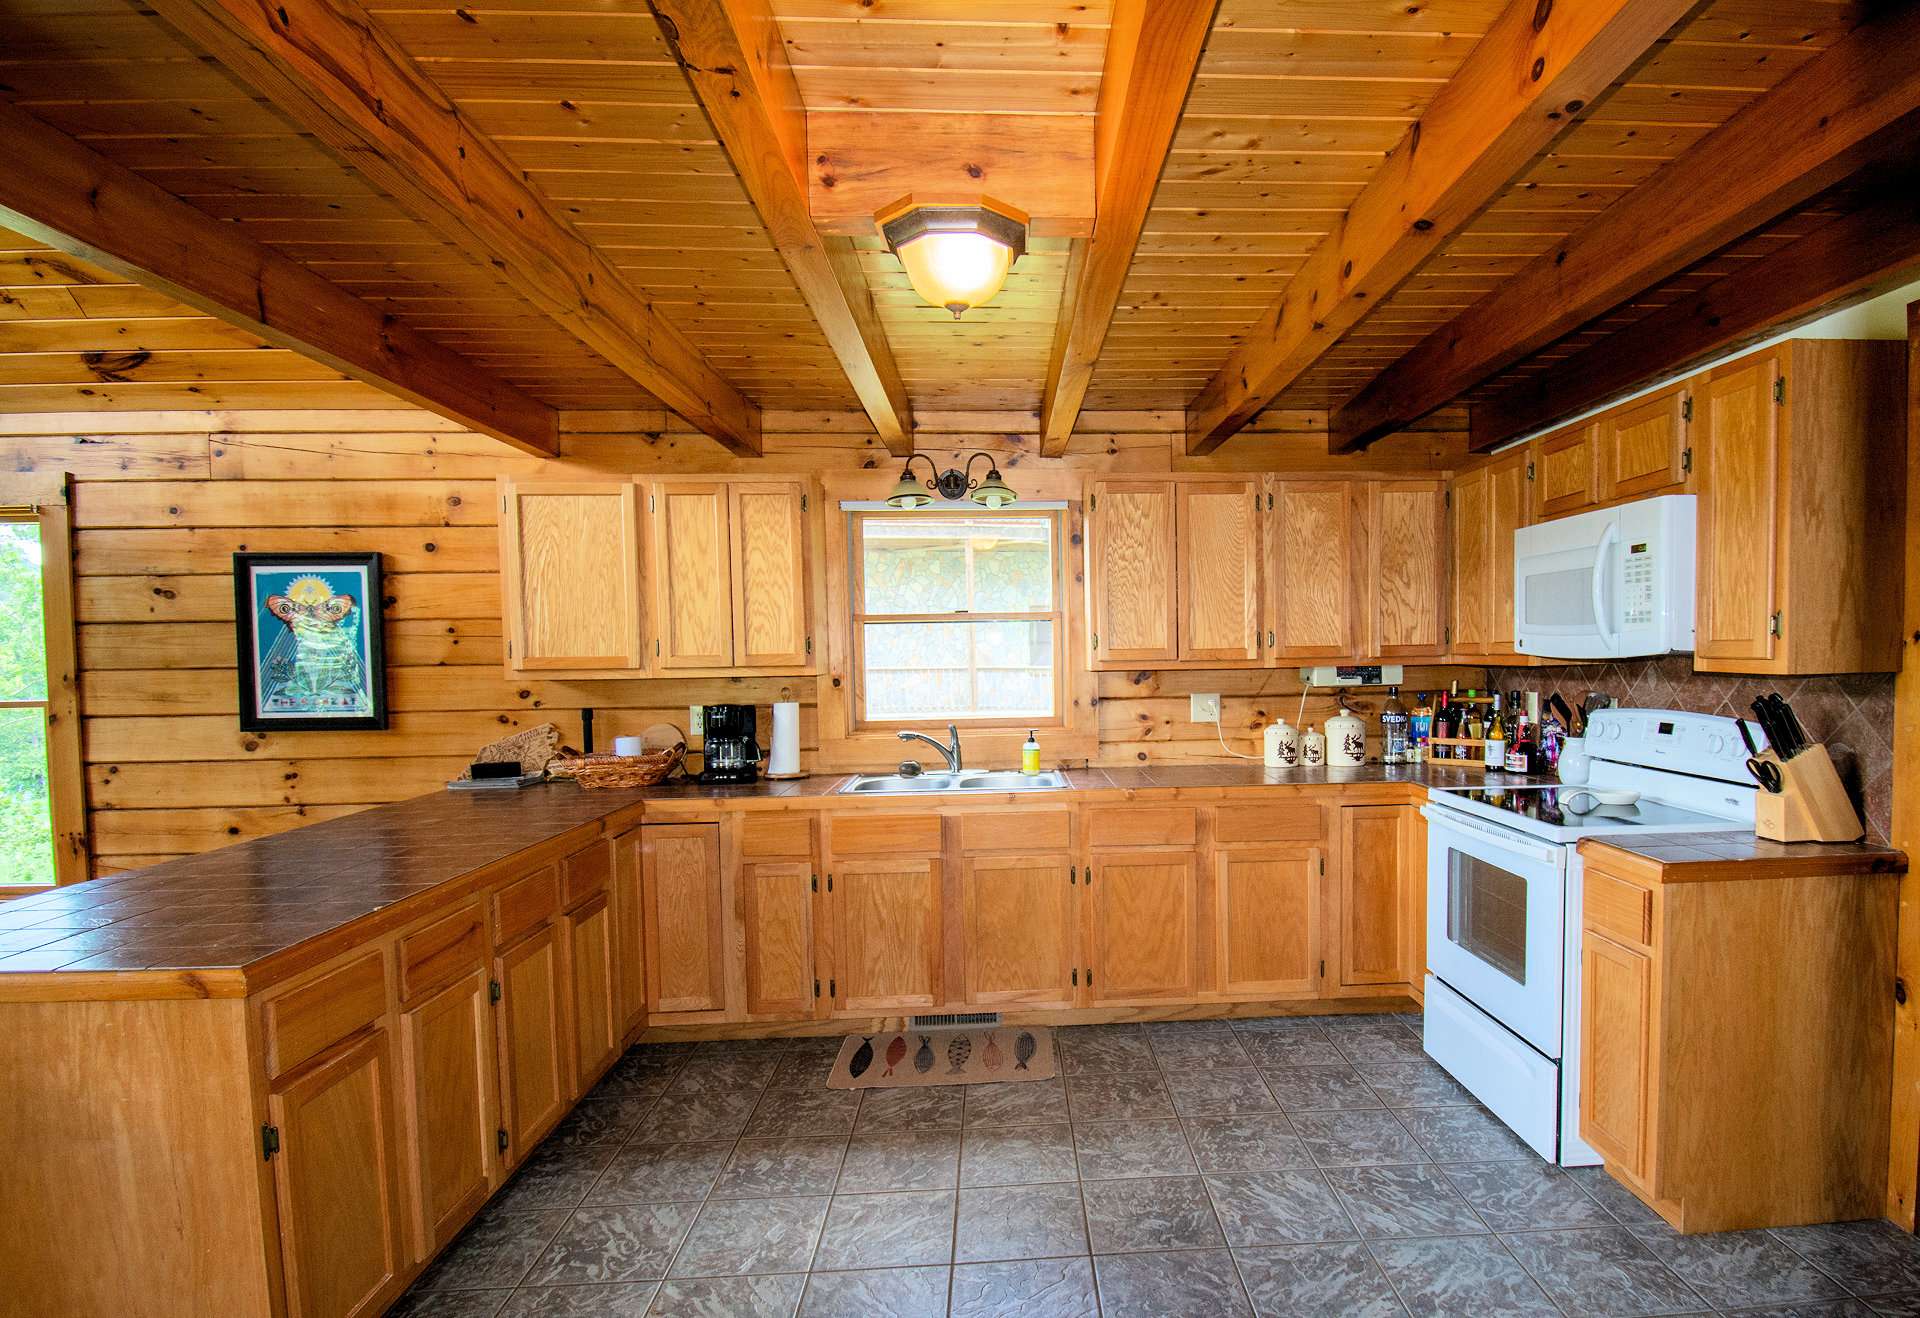 Exposed beams enhance the cabin feel. There is plenty of room for help in the kitchen.